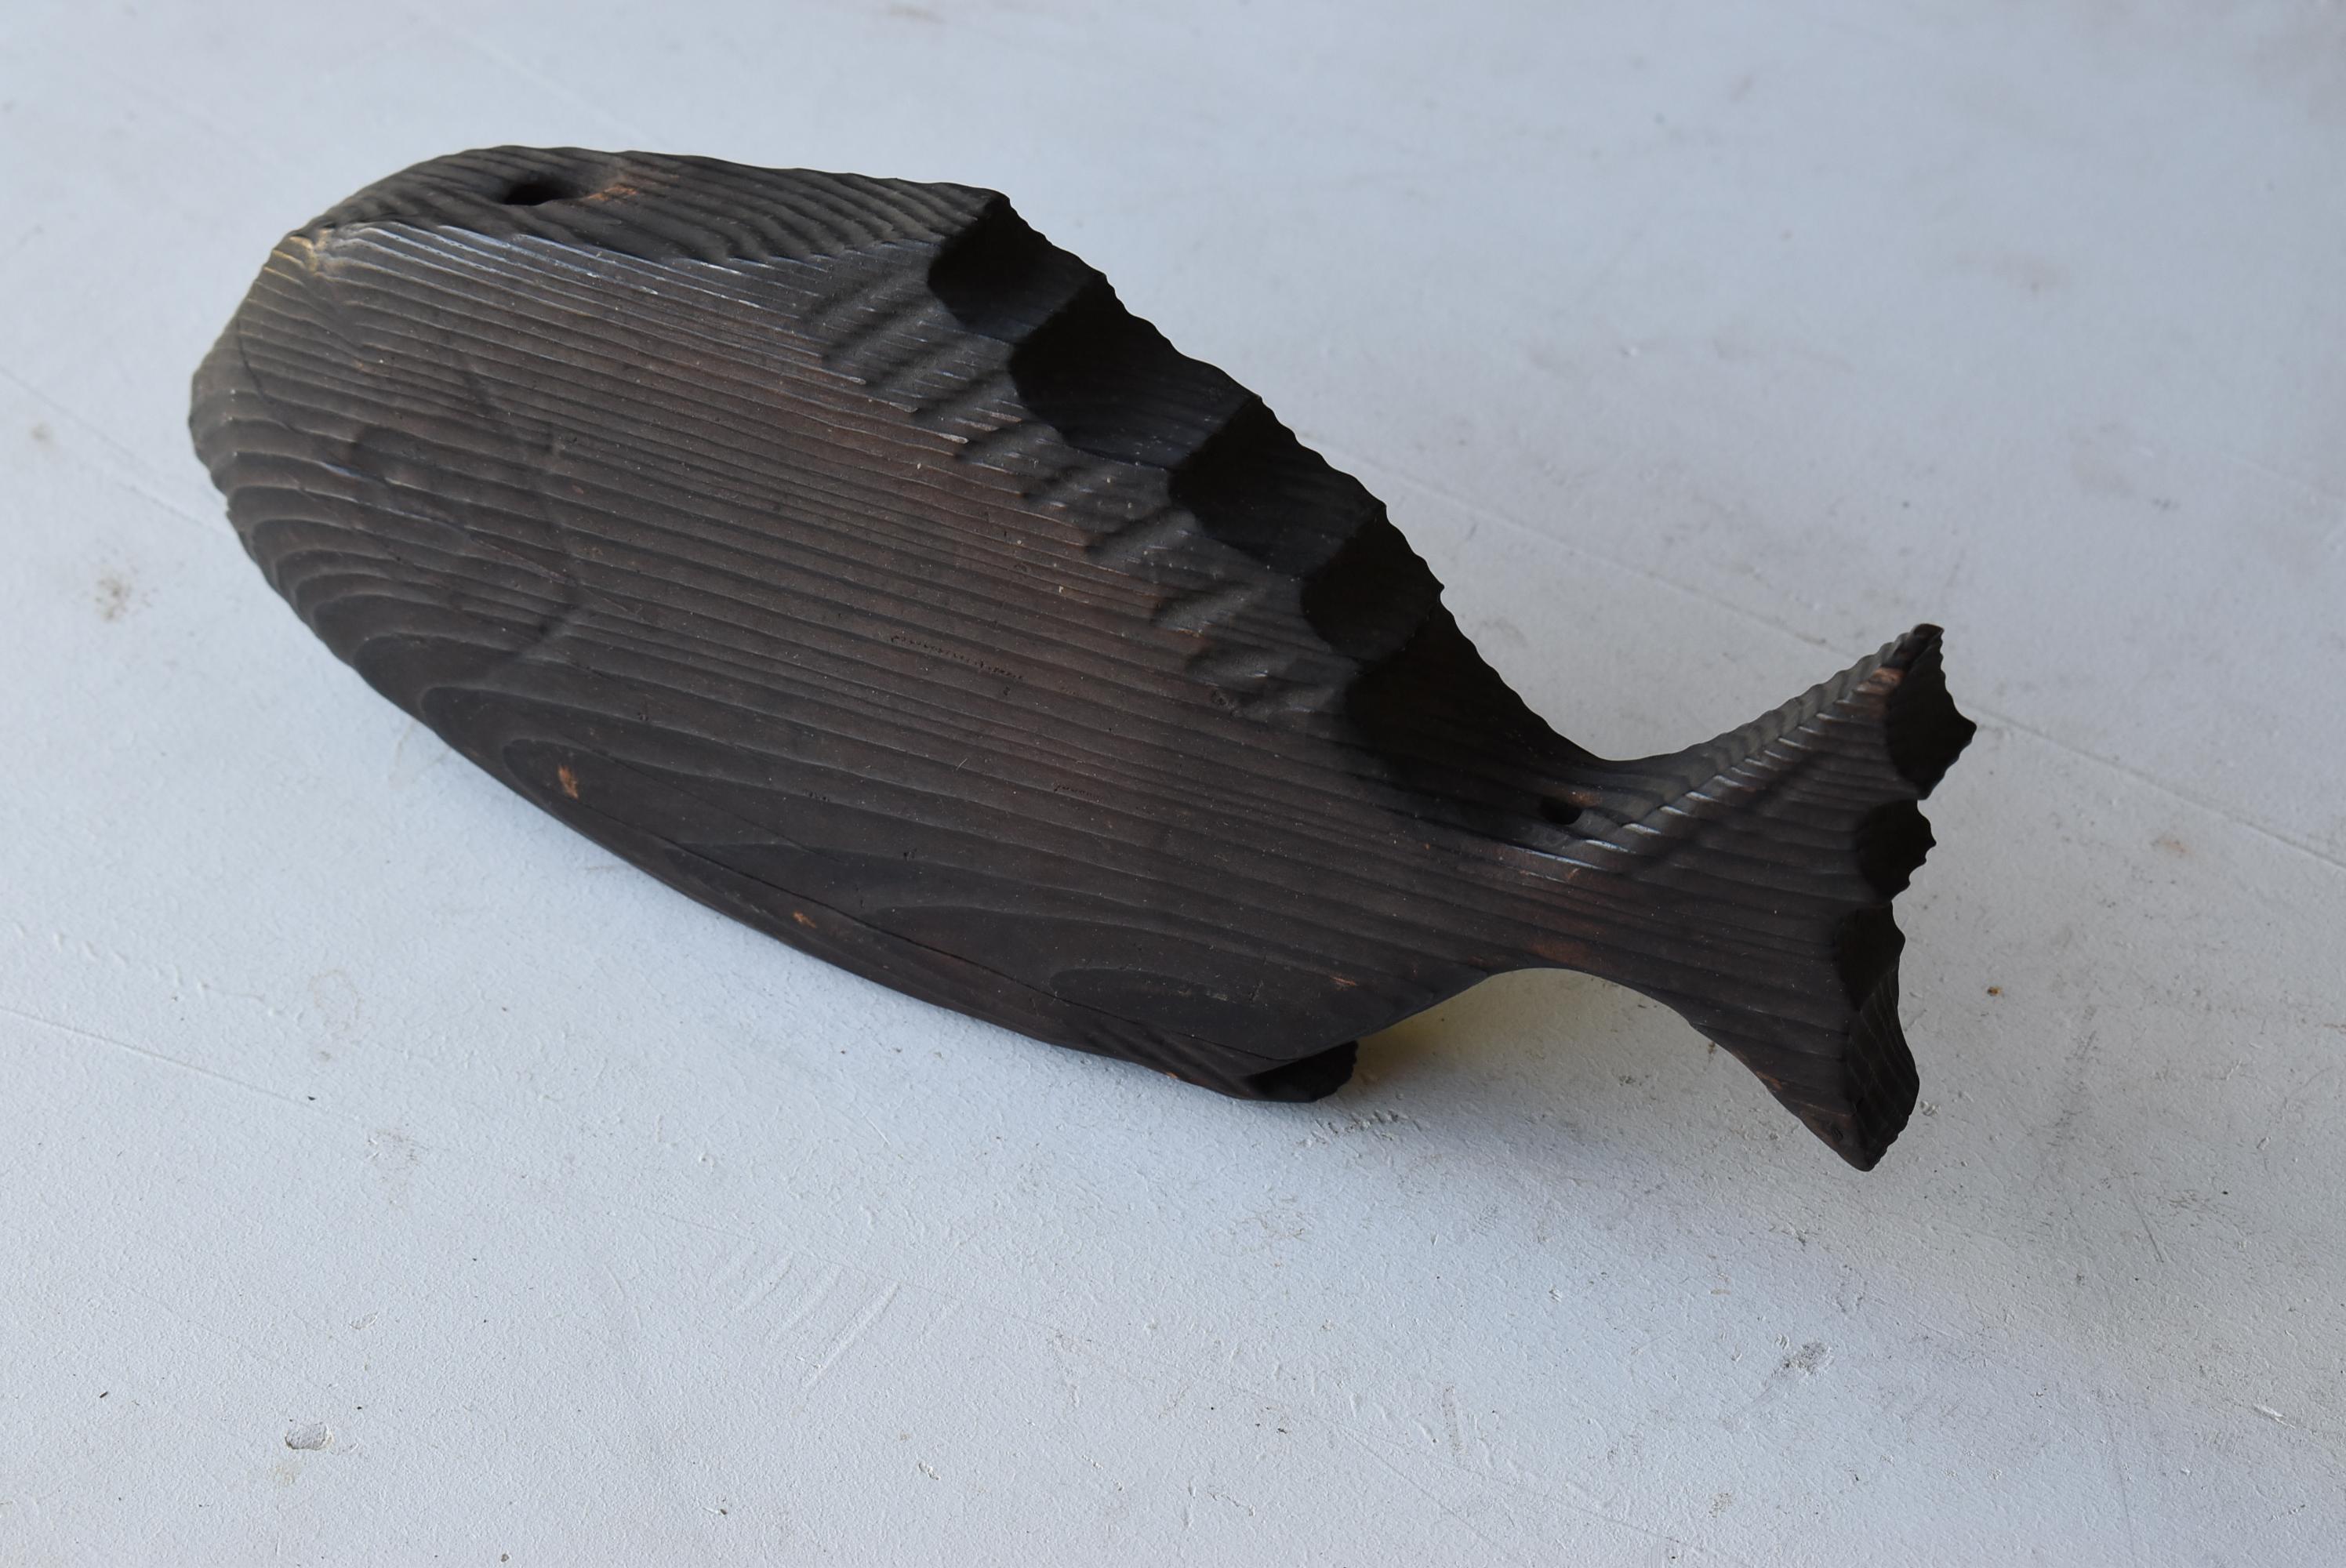 20th Century Japanese Antique Wood Carving Fish 1860s-1900s / Mingei Figurine Object Wabisabi For Sale